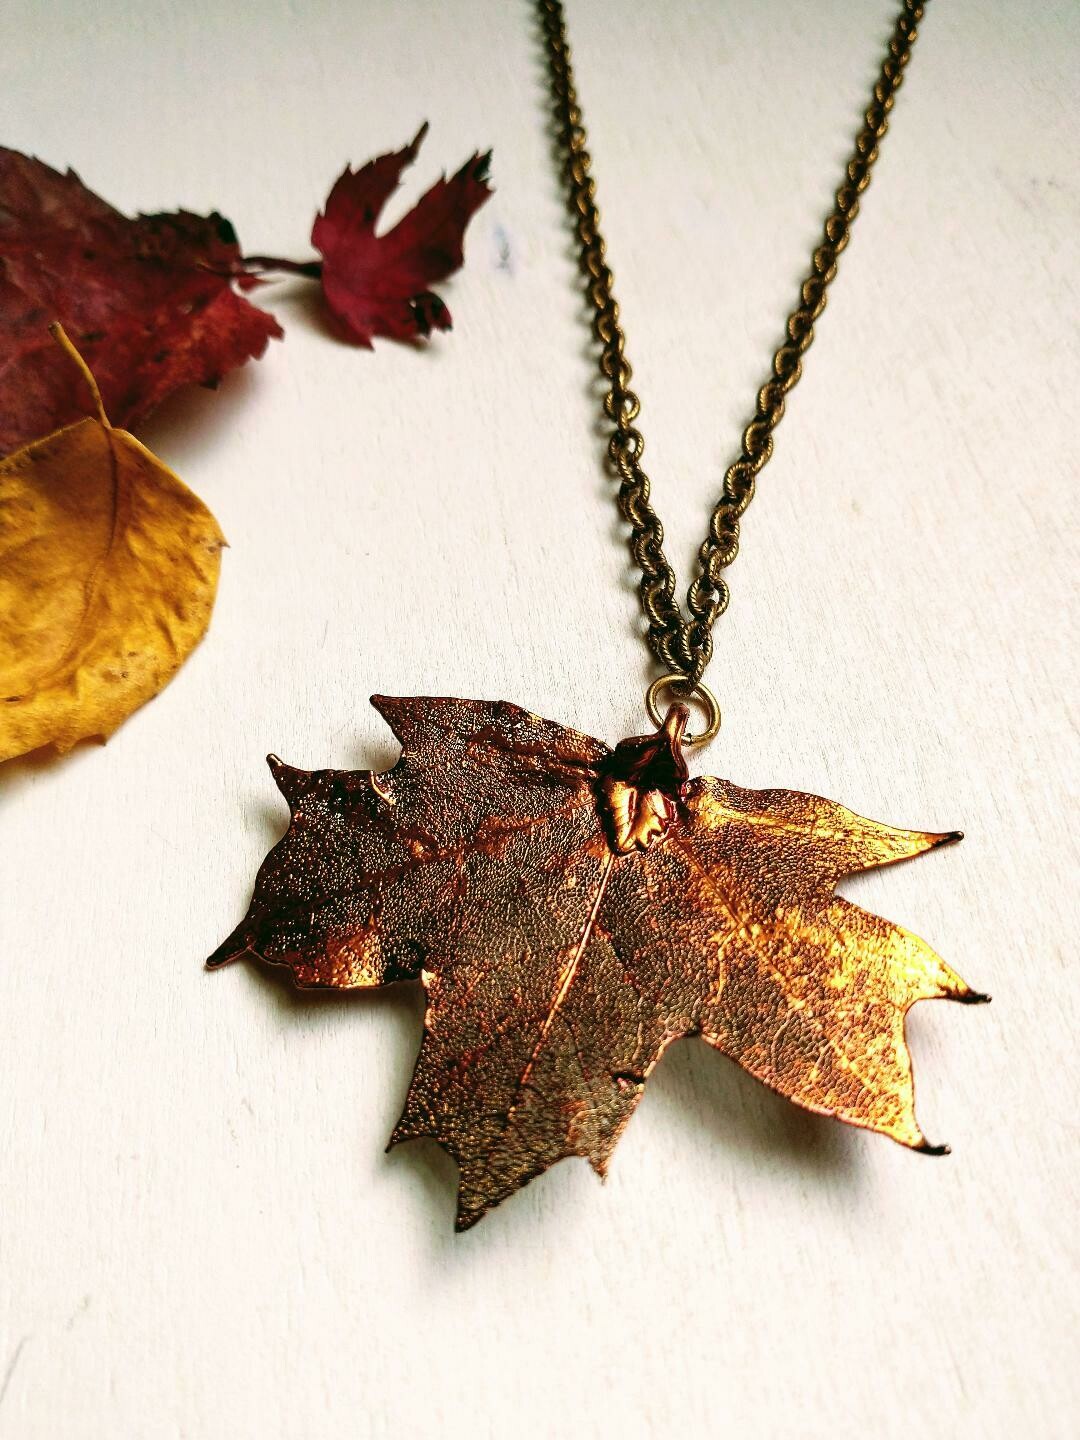 Was $24 - Now $13 (Copper Electroplated Maple Leaf Necklace)